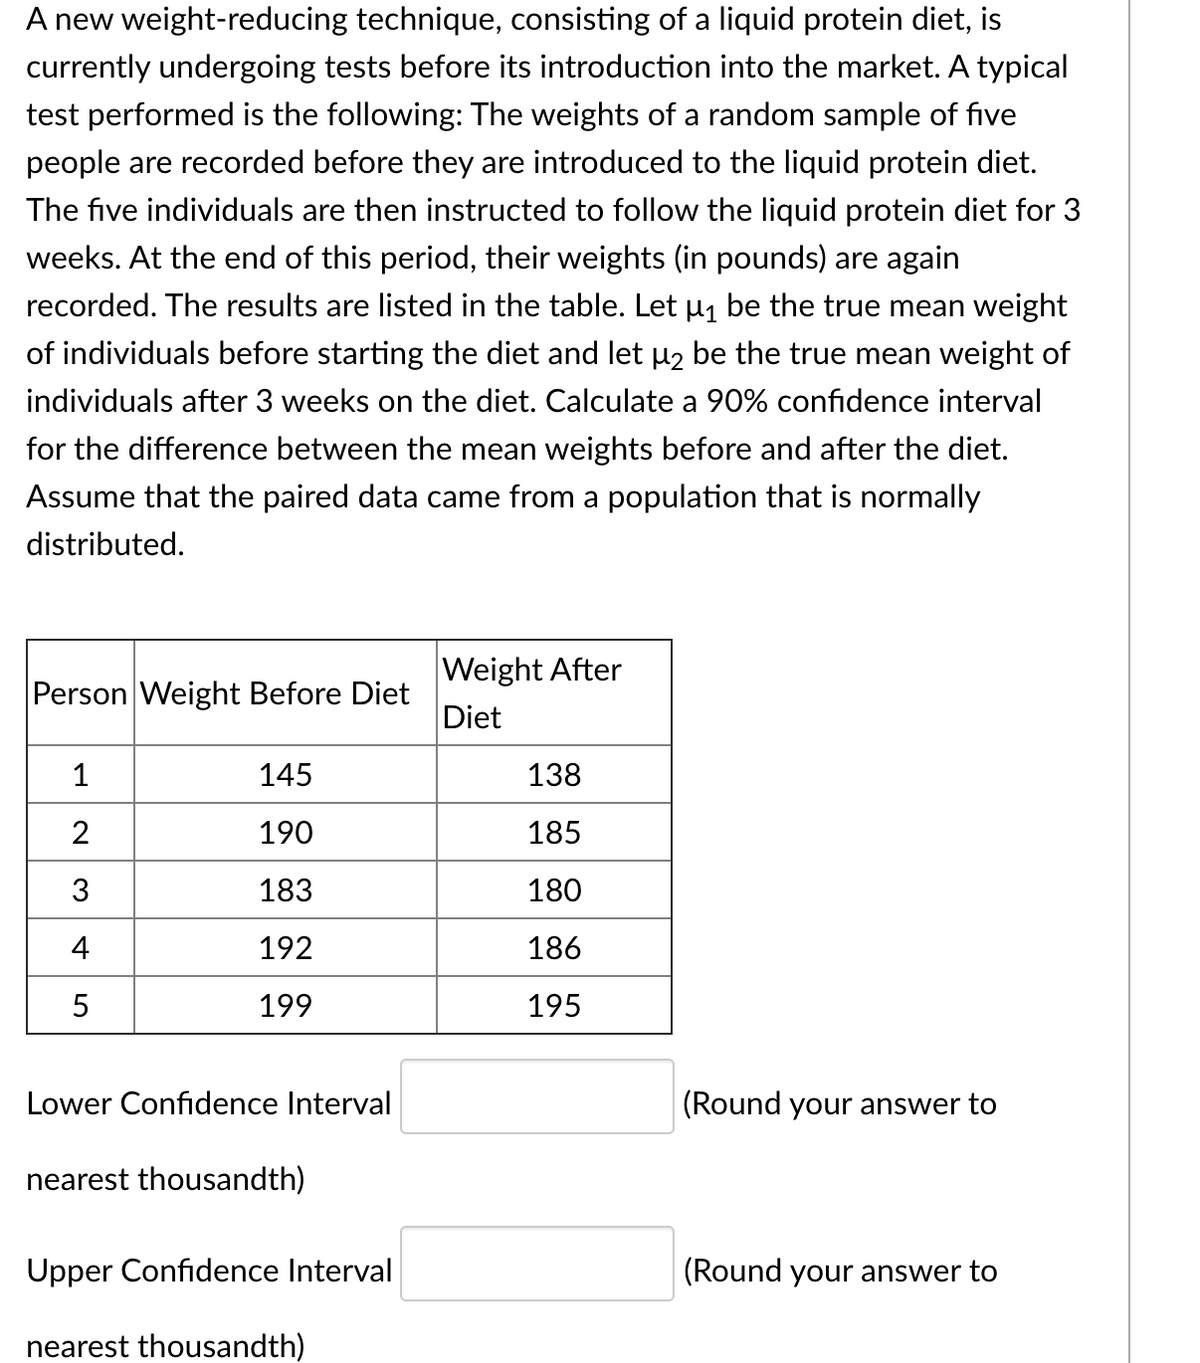 A new weight-reducing technique, consisting of a liquid protein diet, is
currently undergoing tests before its introduction into the market. A typical
test performed is the following: The weights of a random sample of five
people are recorded before they are introduced to the liquid protein diet.
The five individuals are then instructed to follow the liquid protein diet for 3
weeks. At the end of this period, their weights (in pounds) are again
recorded. The results are listed in the table. Let µ1 be the true mean weight
of individuals before starting the diet and let H2 be the true mean weight of
individuals after 3 weeks on the diet. Calculate a 90% confidence interval
for the difference between the mean weights before and after the diet.
Assume that the paired data came from a population that is normally
distributed.
Weight After
Person Weight Before Diet
Diet
1
145
138
2
190
185
3
183
180
192
186
199
195
Lower Confidence Interval
(Round your answer to
nearest thousandth)
Upper Confidence Interval
(Round your answer to
nearest thousandth)
